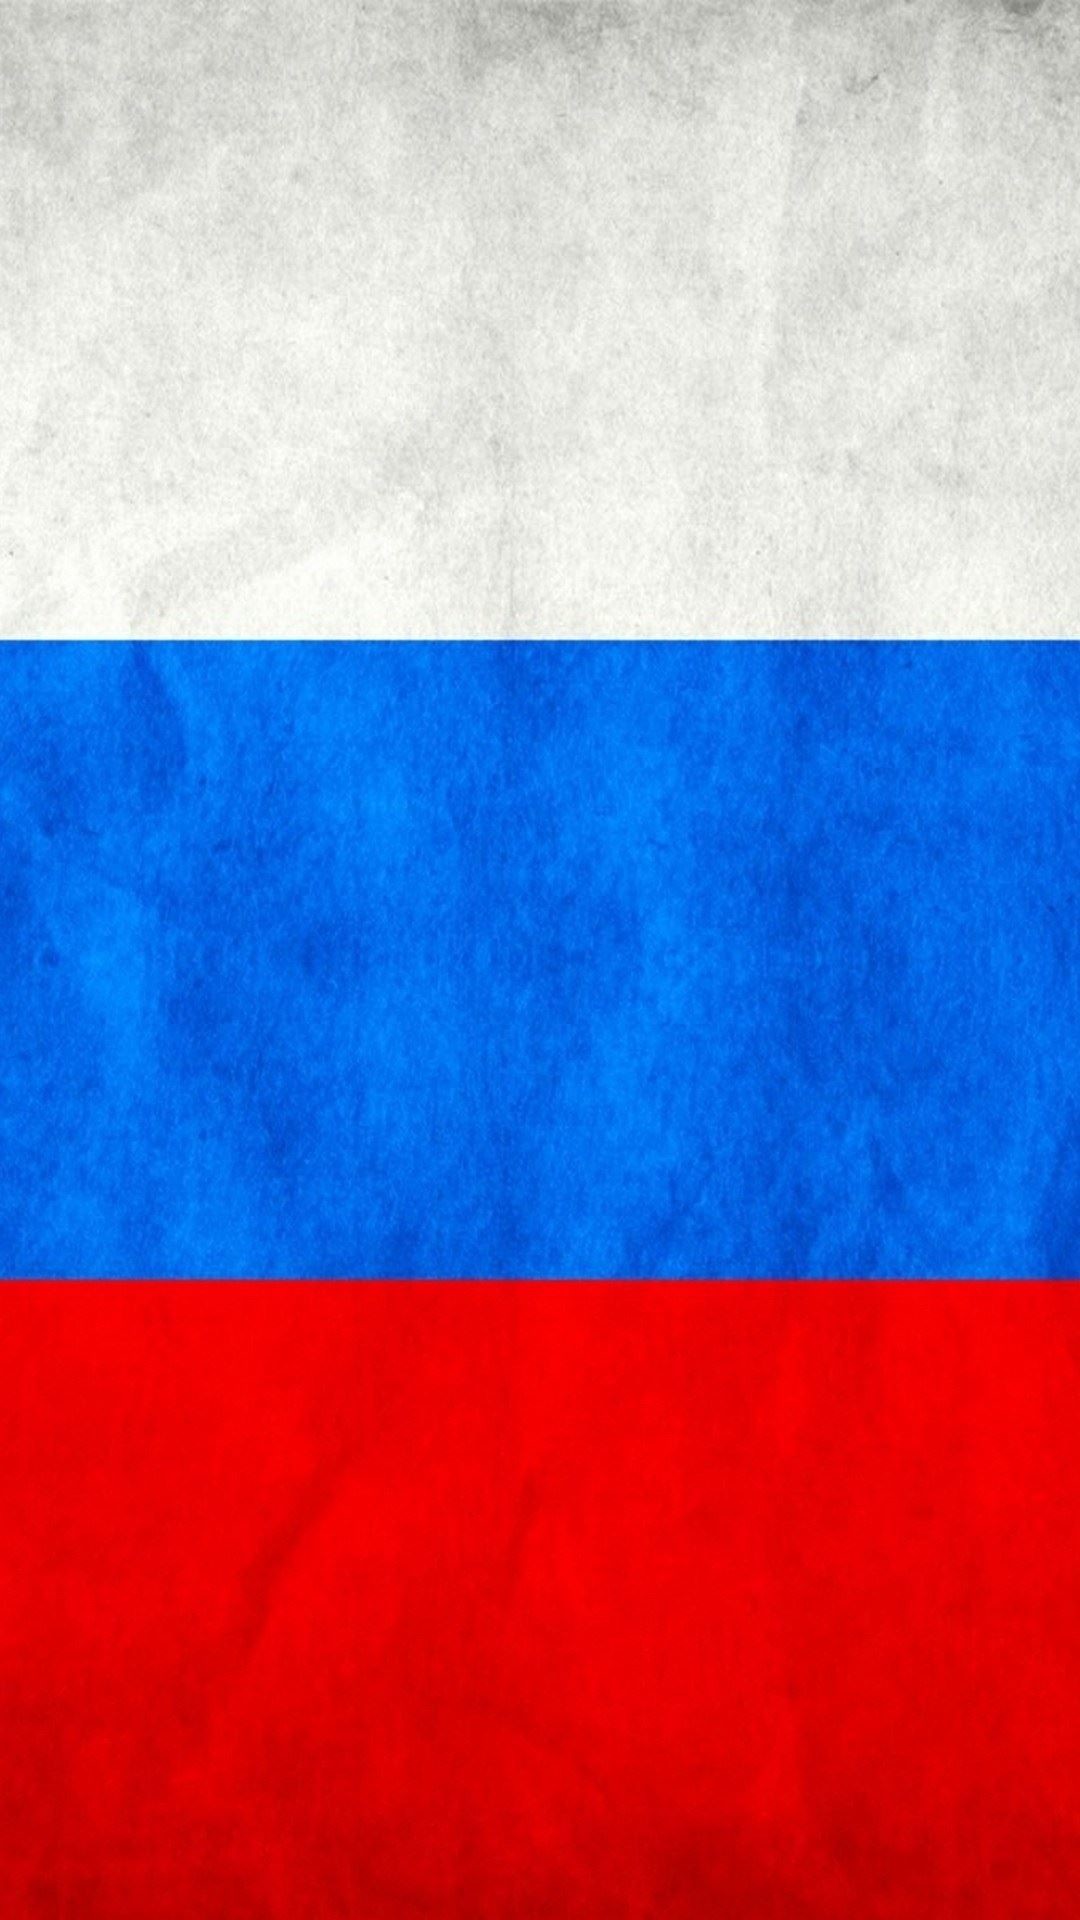 1080x1920 Russia Grungy Flag Wallpaper Russia World Wallpapers) – Wallpapers and  Backgrounds